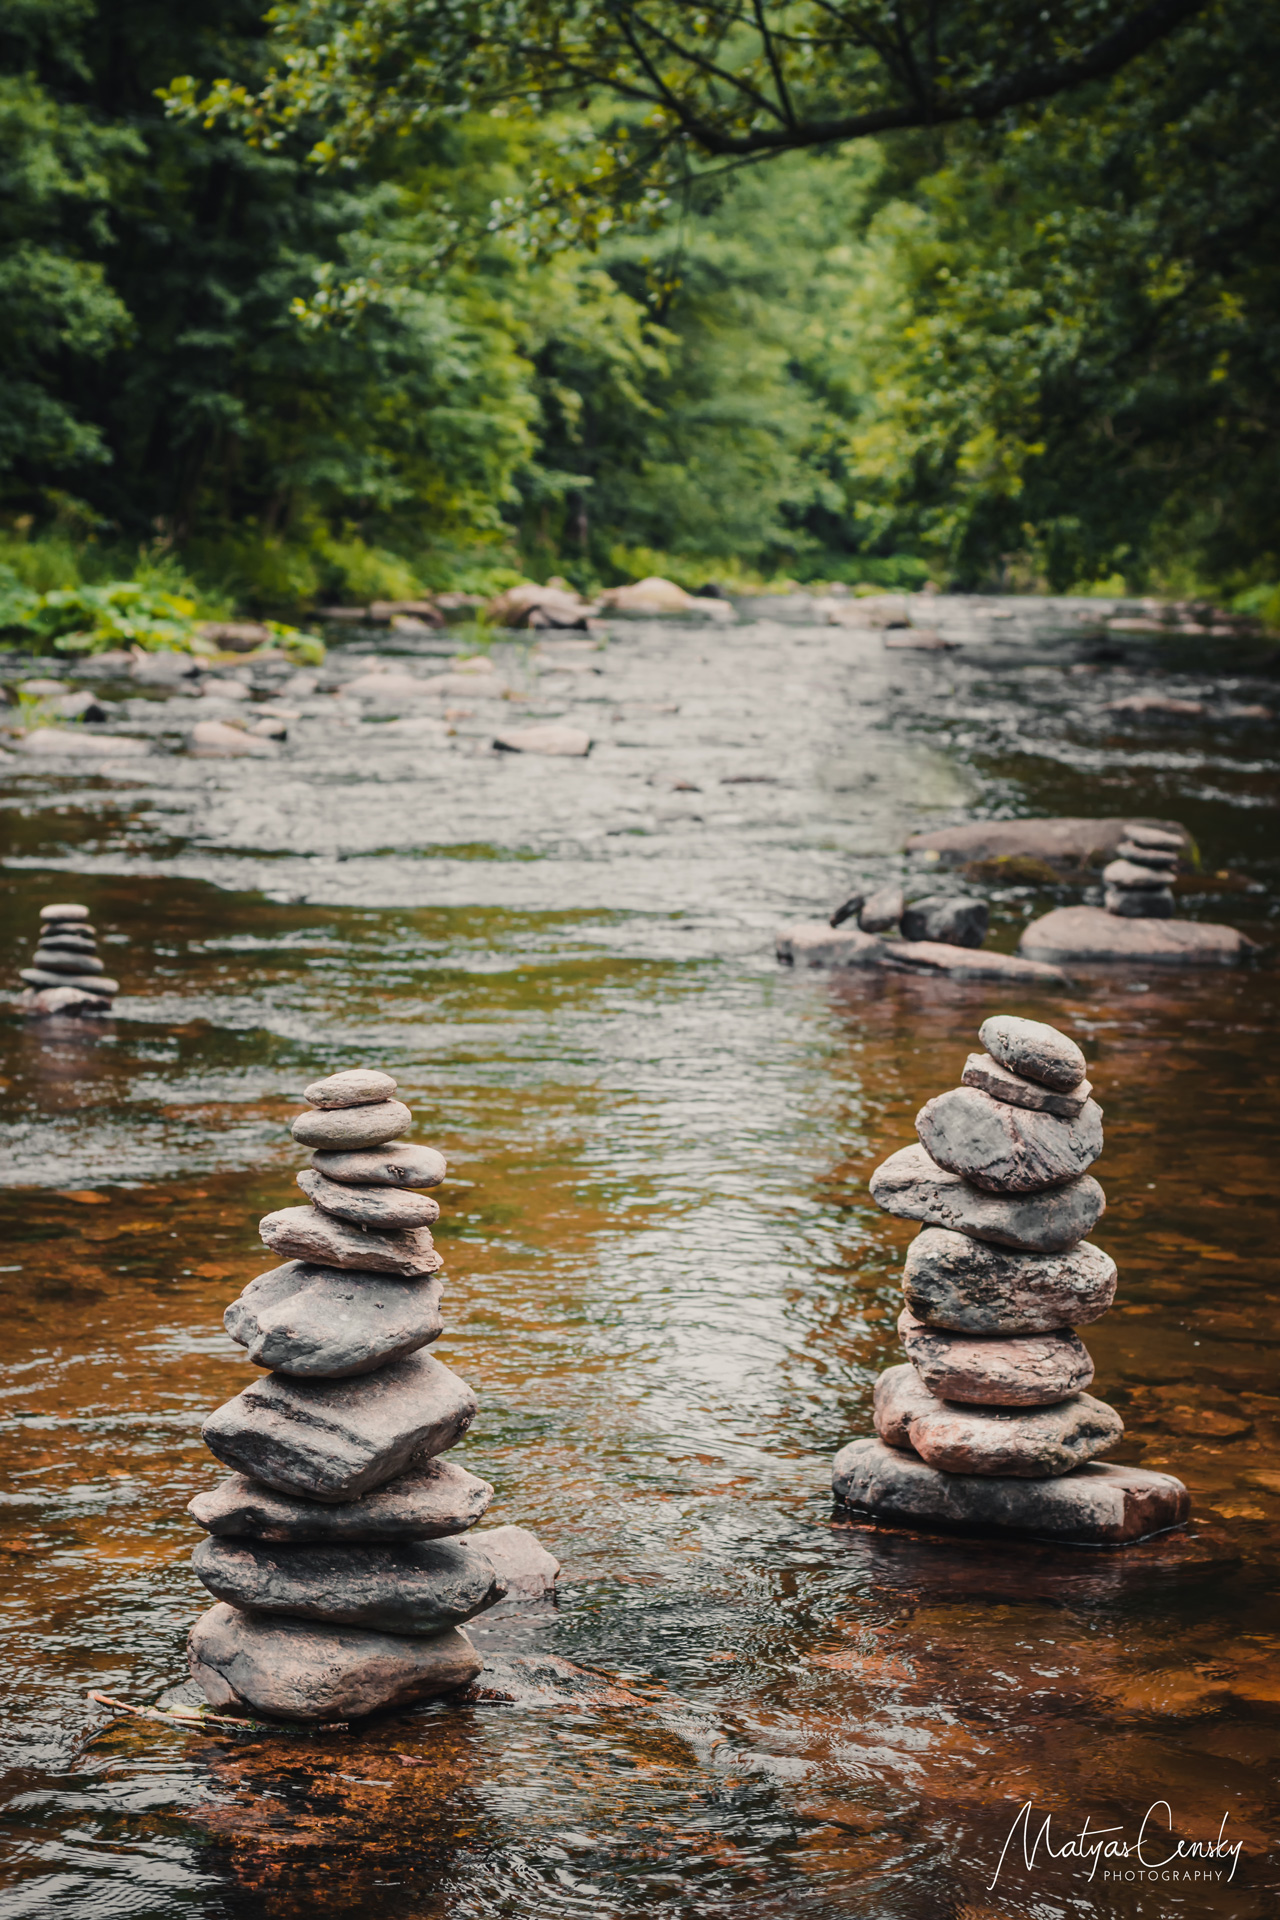 Photo of four statues of balanced stones in the river in a green forest.